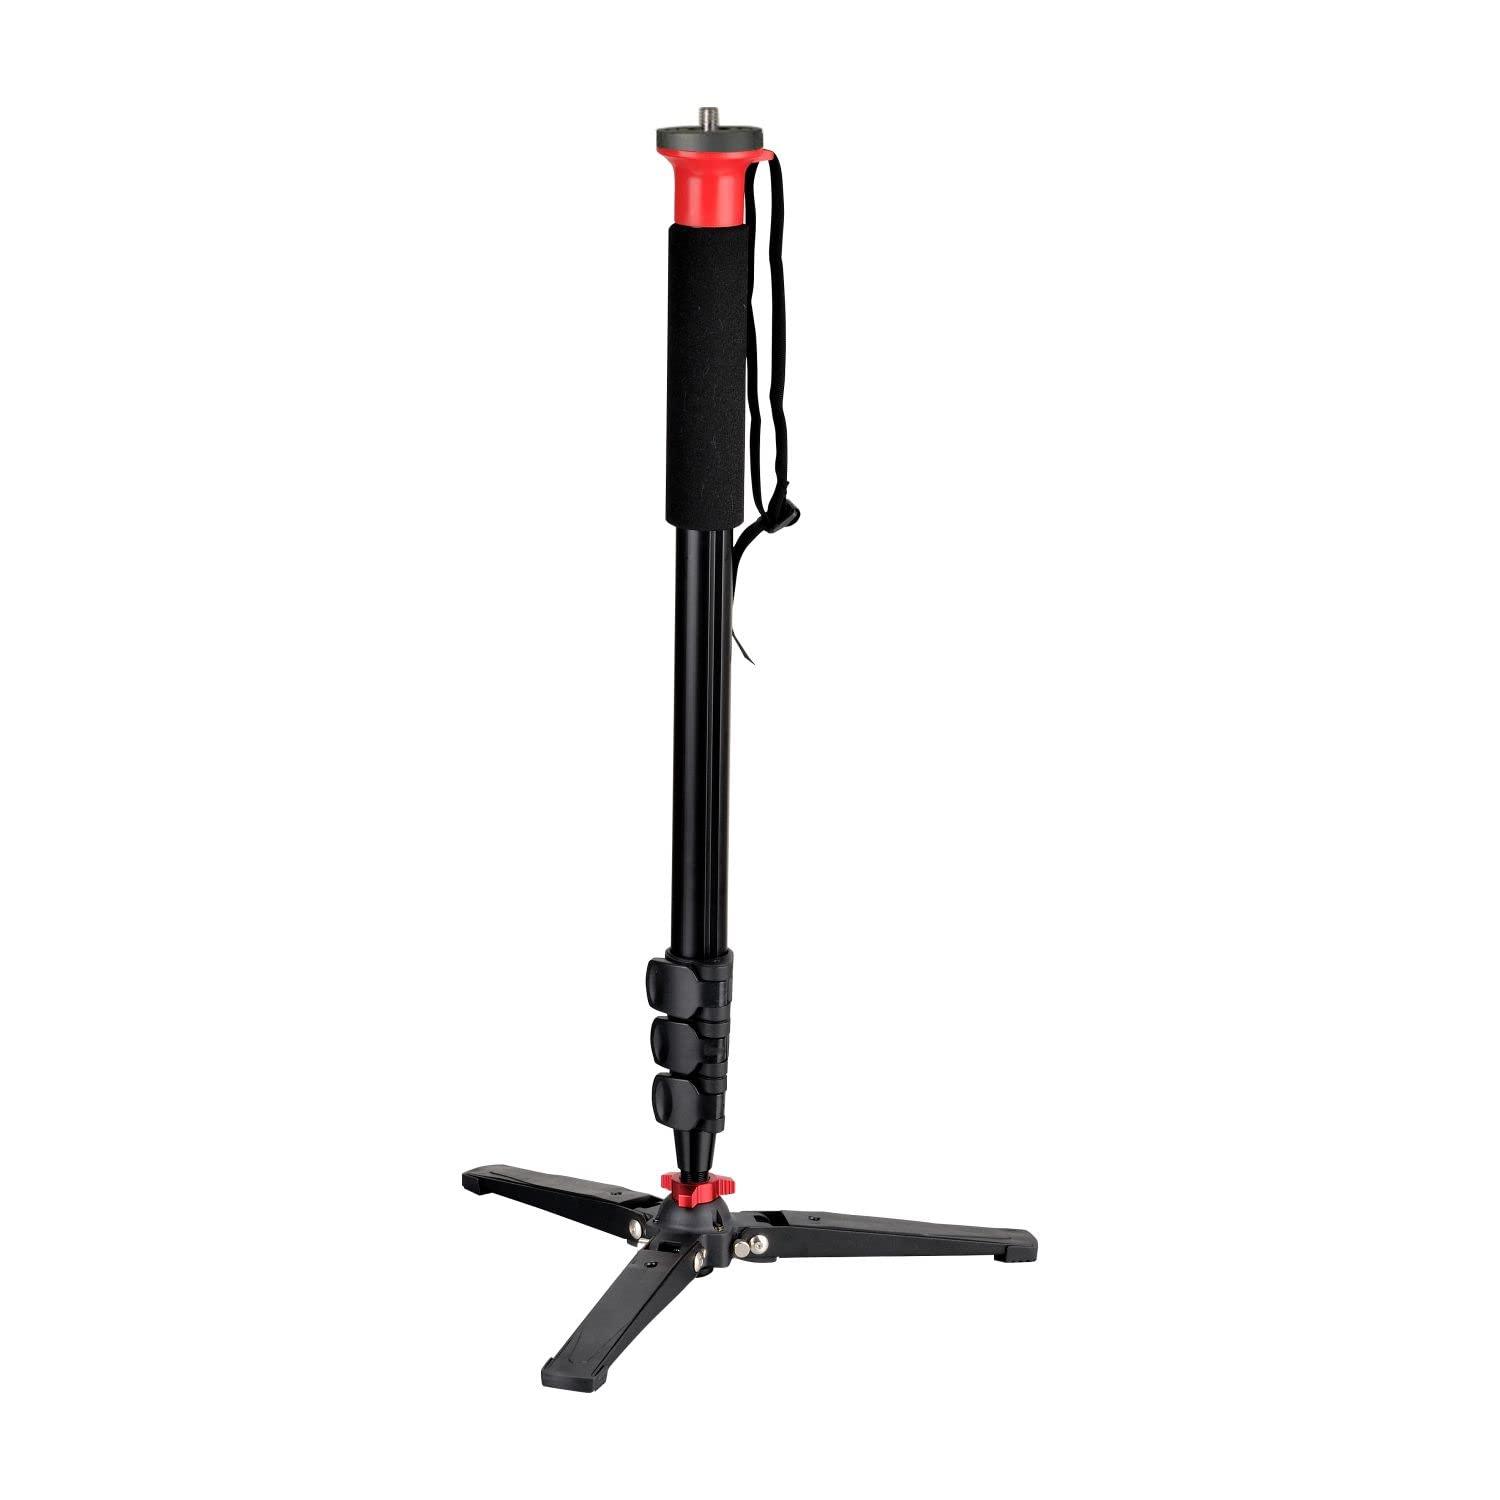 Digitek (DMP-70) Professional Monopod with Flip Lock, Portable & Stable Monopod with 3 Leg Base, Max. Operating Height: (5.56 Feet), Max. Load Up to: 3 kg - Digitek